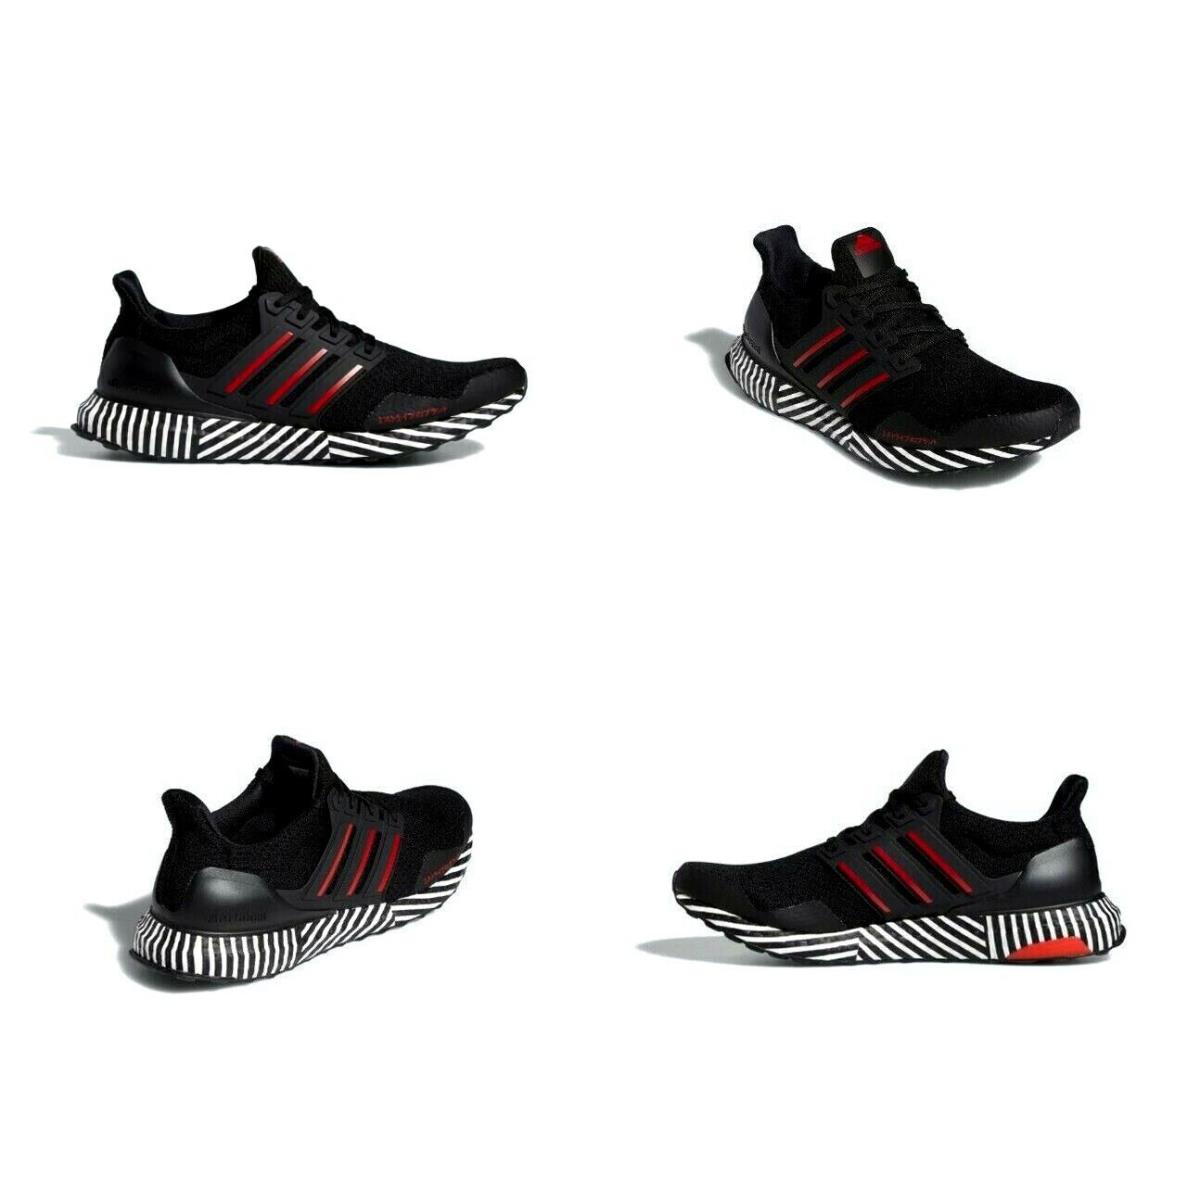 Adidas Ultraboost Running Shoes Boost Black / Red / White Mens Size 7 FY8382